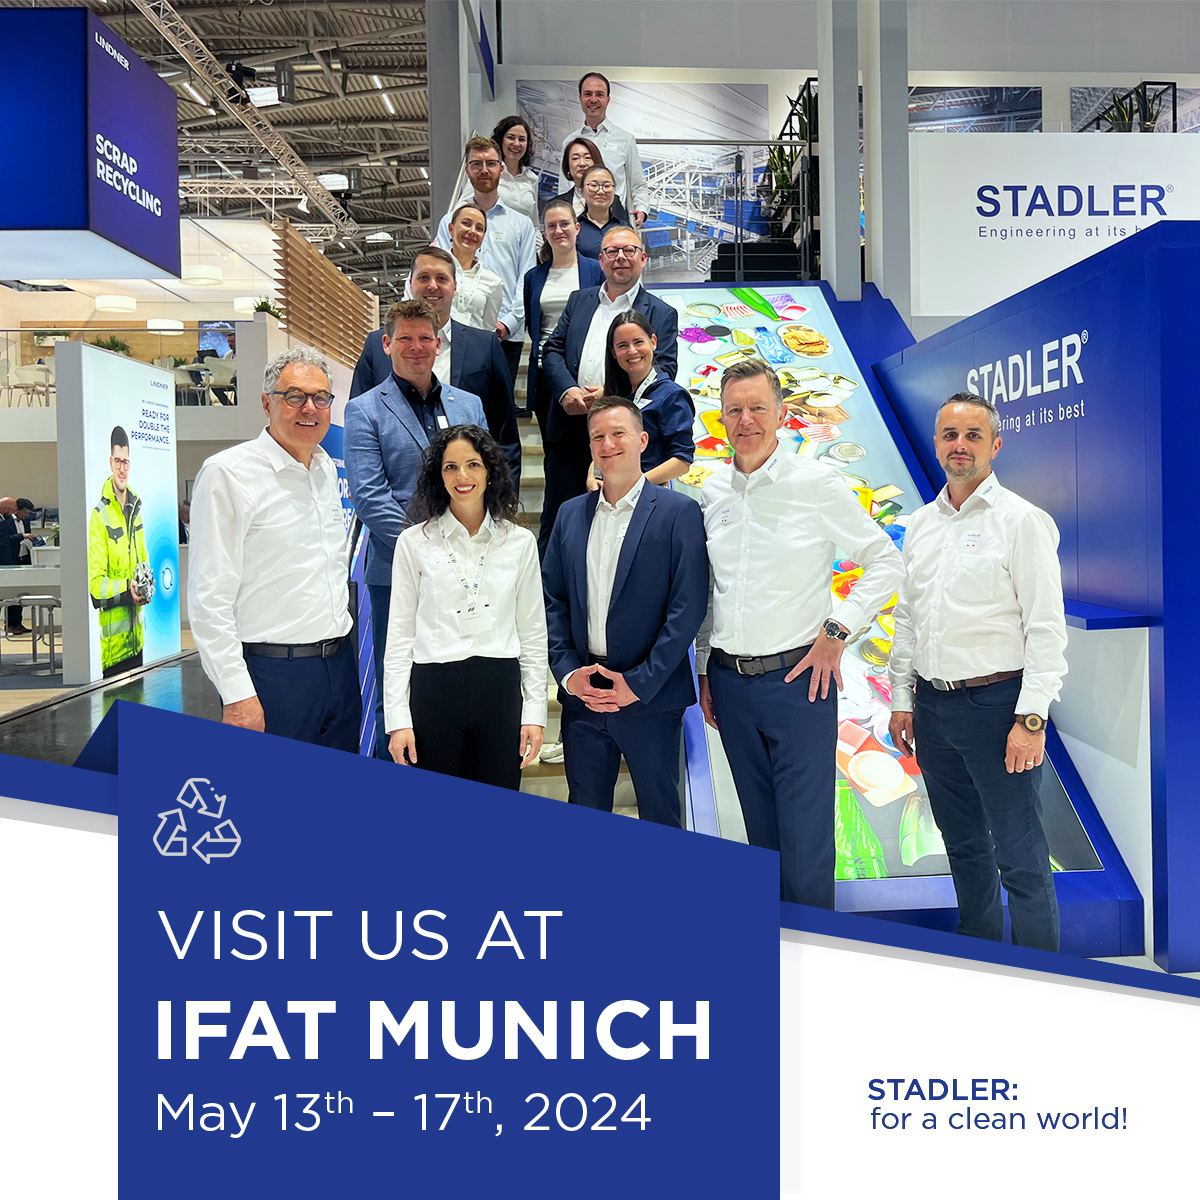 It's time to get started! 🏁 It's the first day of the #IFAT Munich 2024 Come and meet us at booth number 351/450 to discuss your upcoming projects with our team. See you there! #stadler #ifatmunich #visitus #recycling #wastesorting #sortingplants #waste #munich